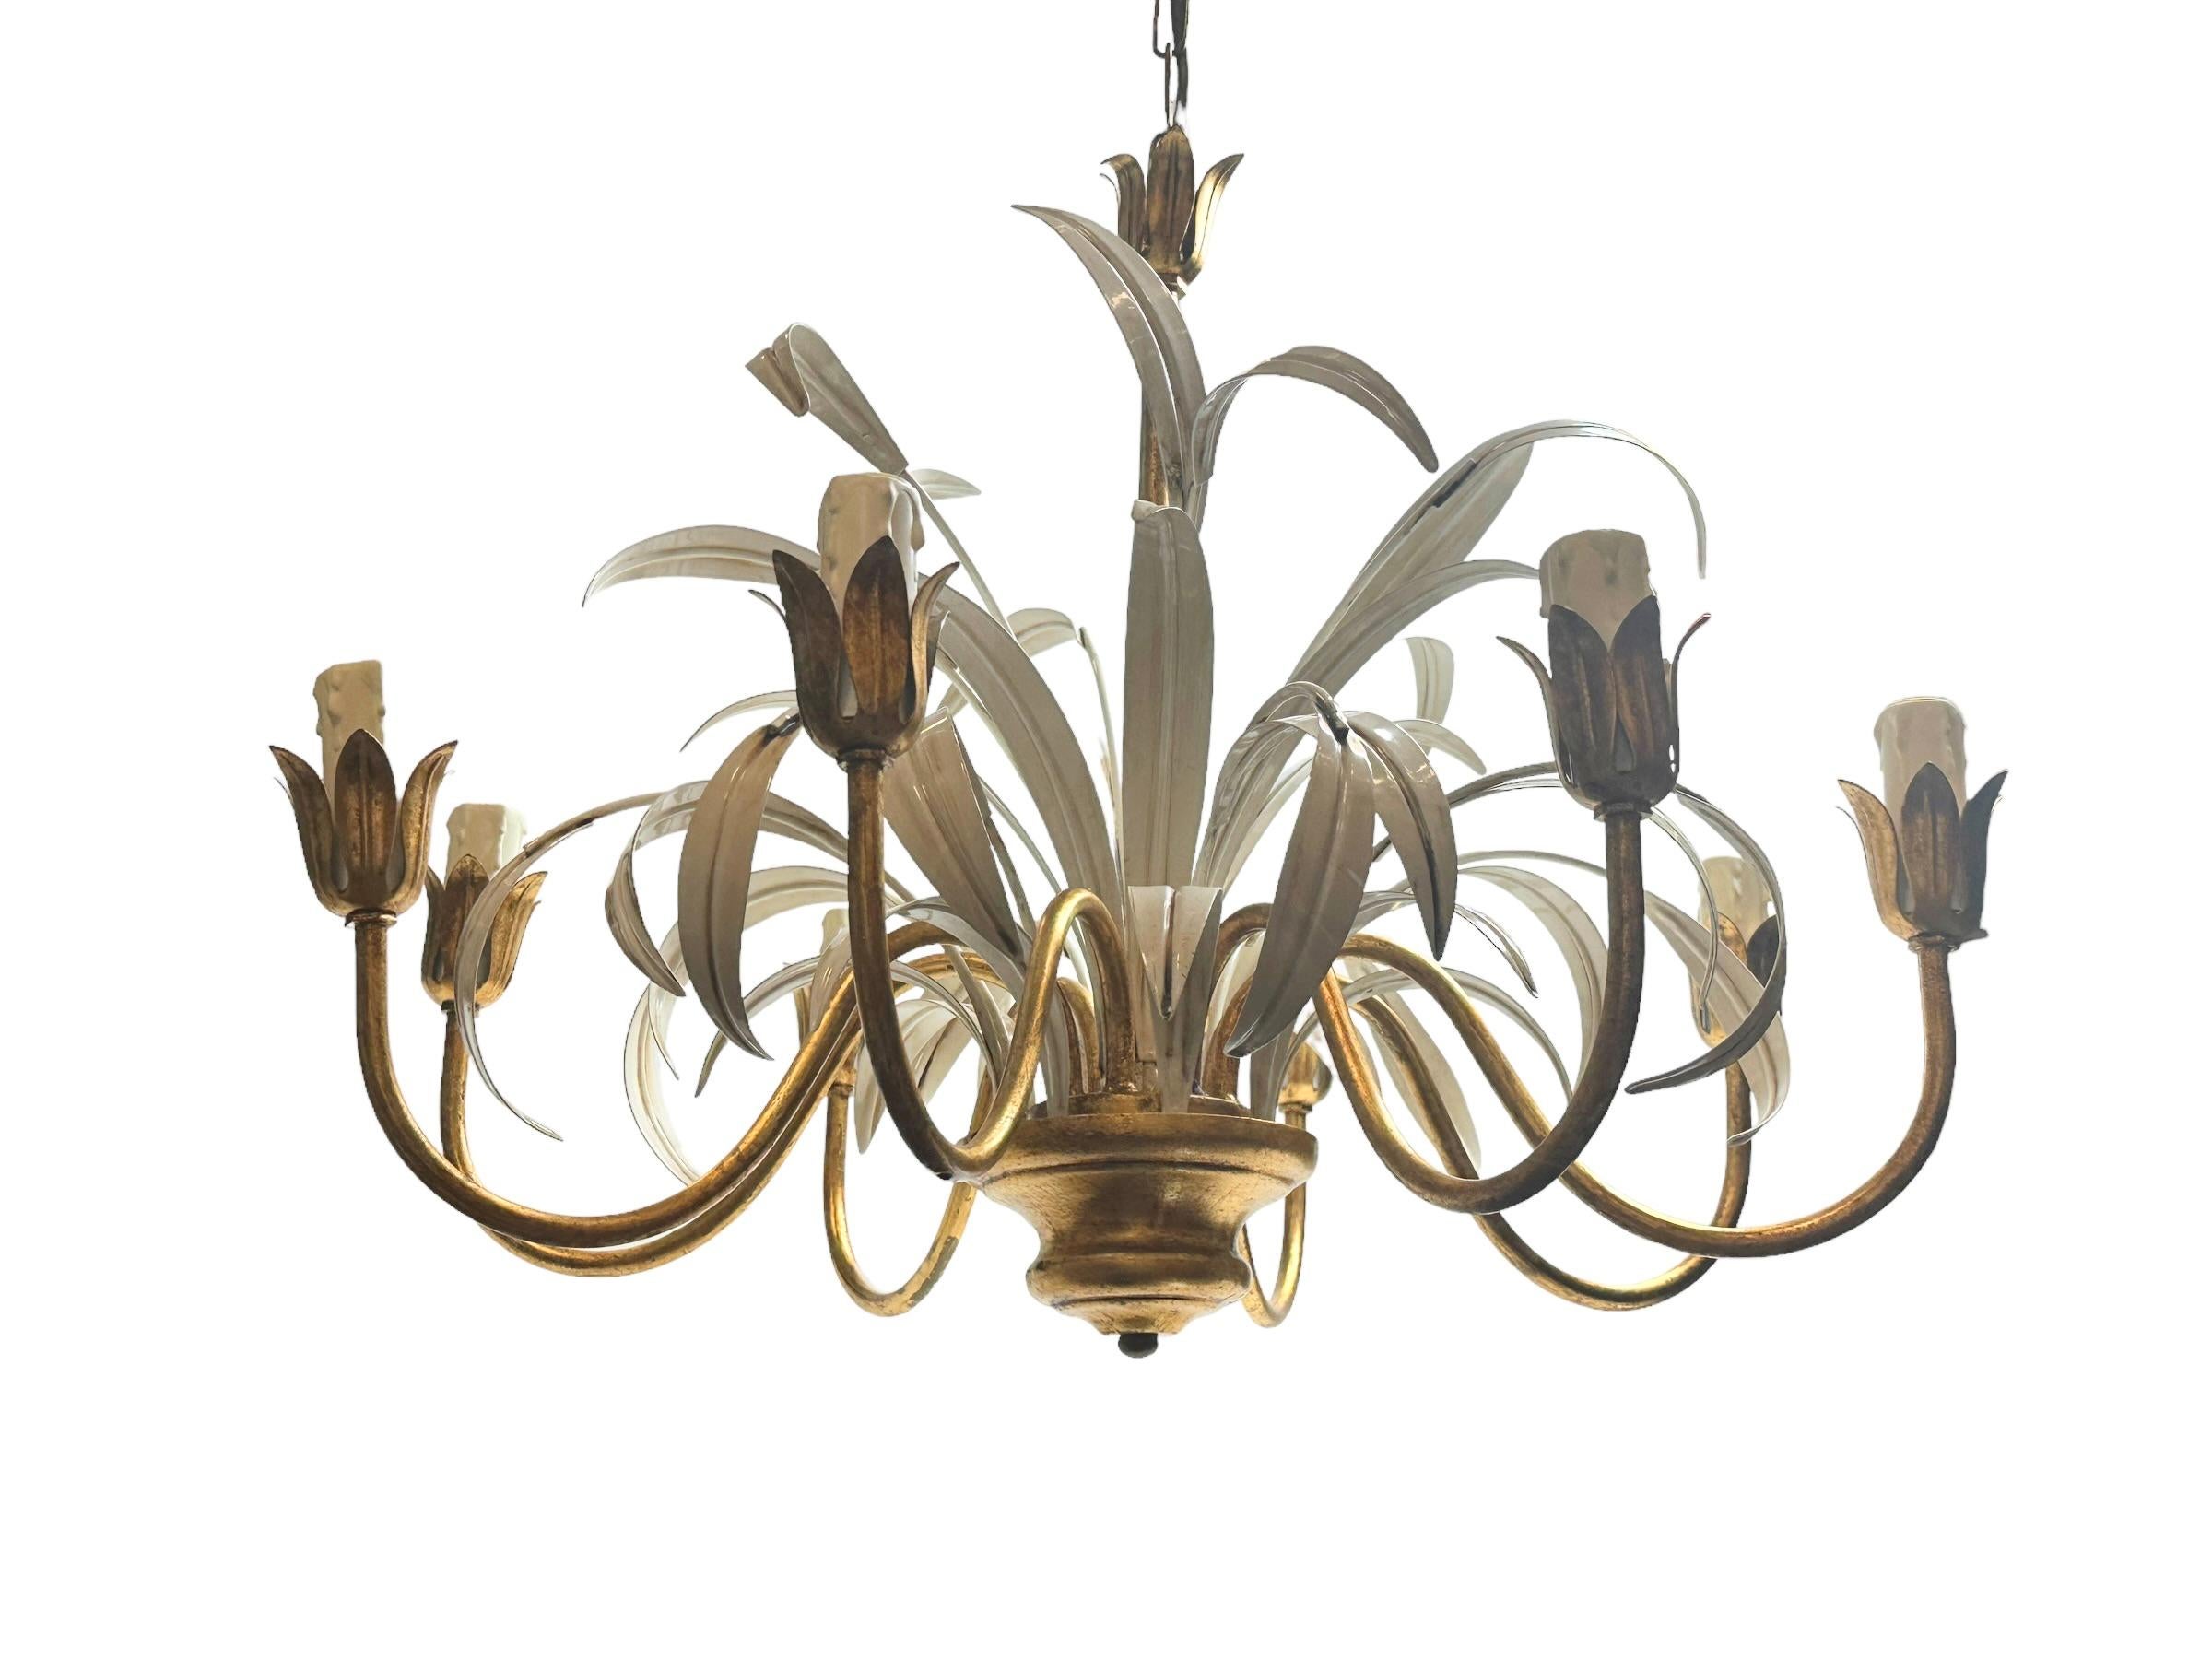 8-Light Gilt Metal Reed Leaf Chandelier Tole Toleware Coco Chanel Style, Italy For Sale 5